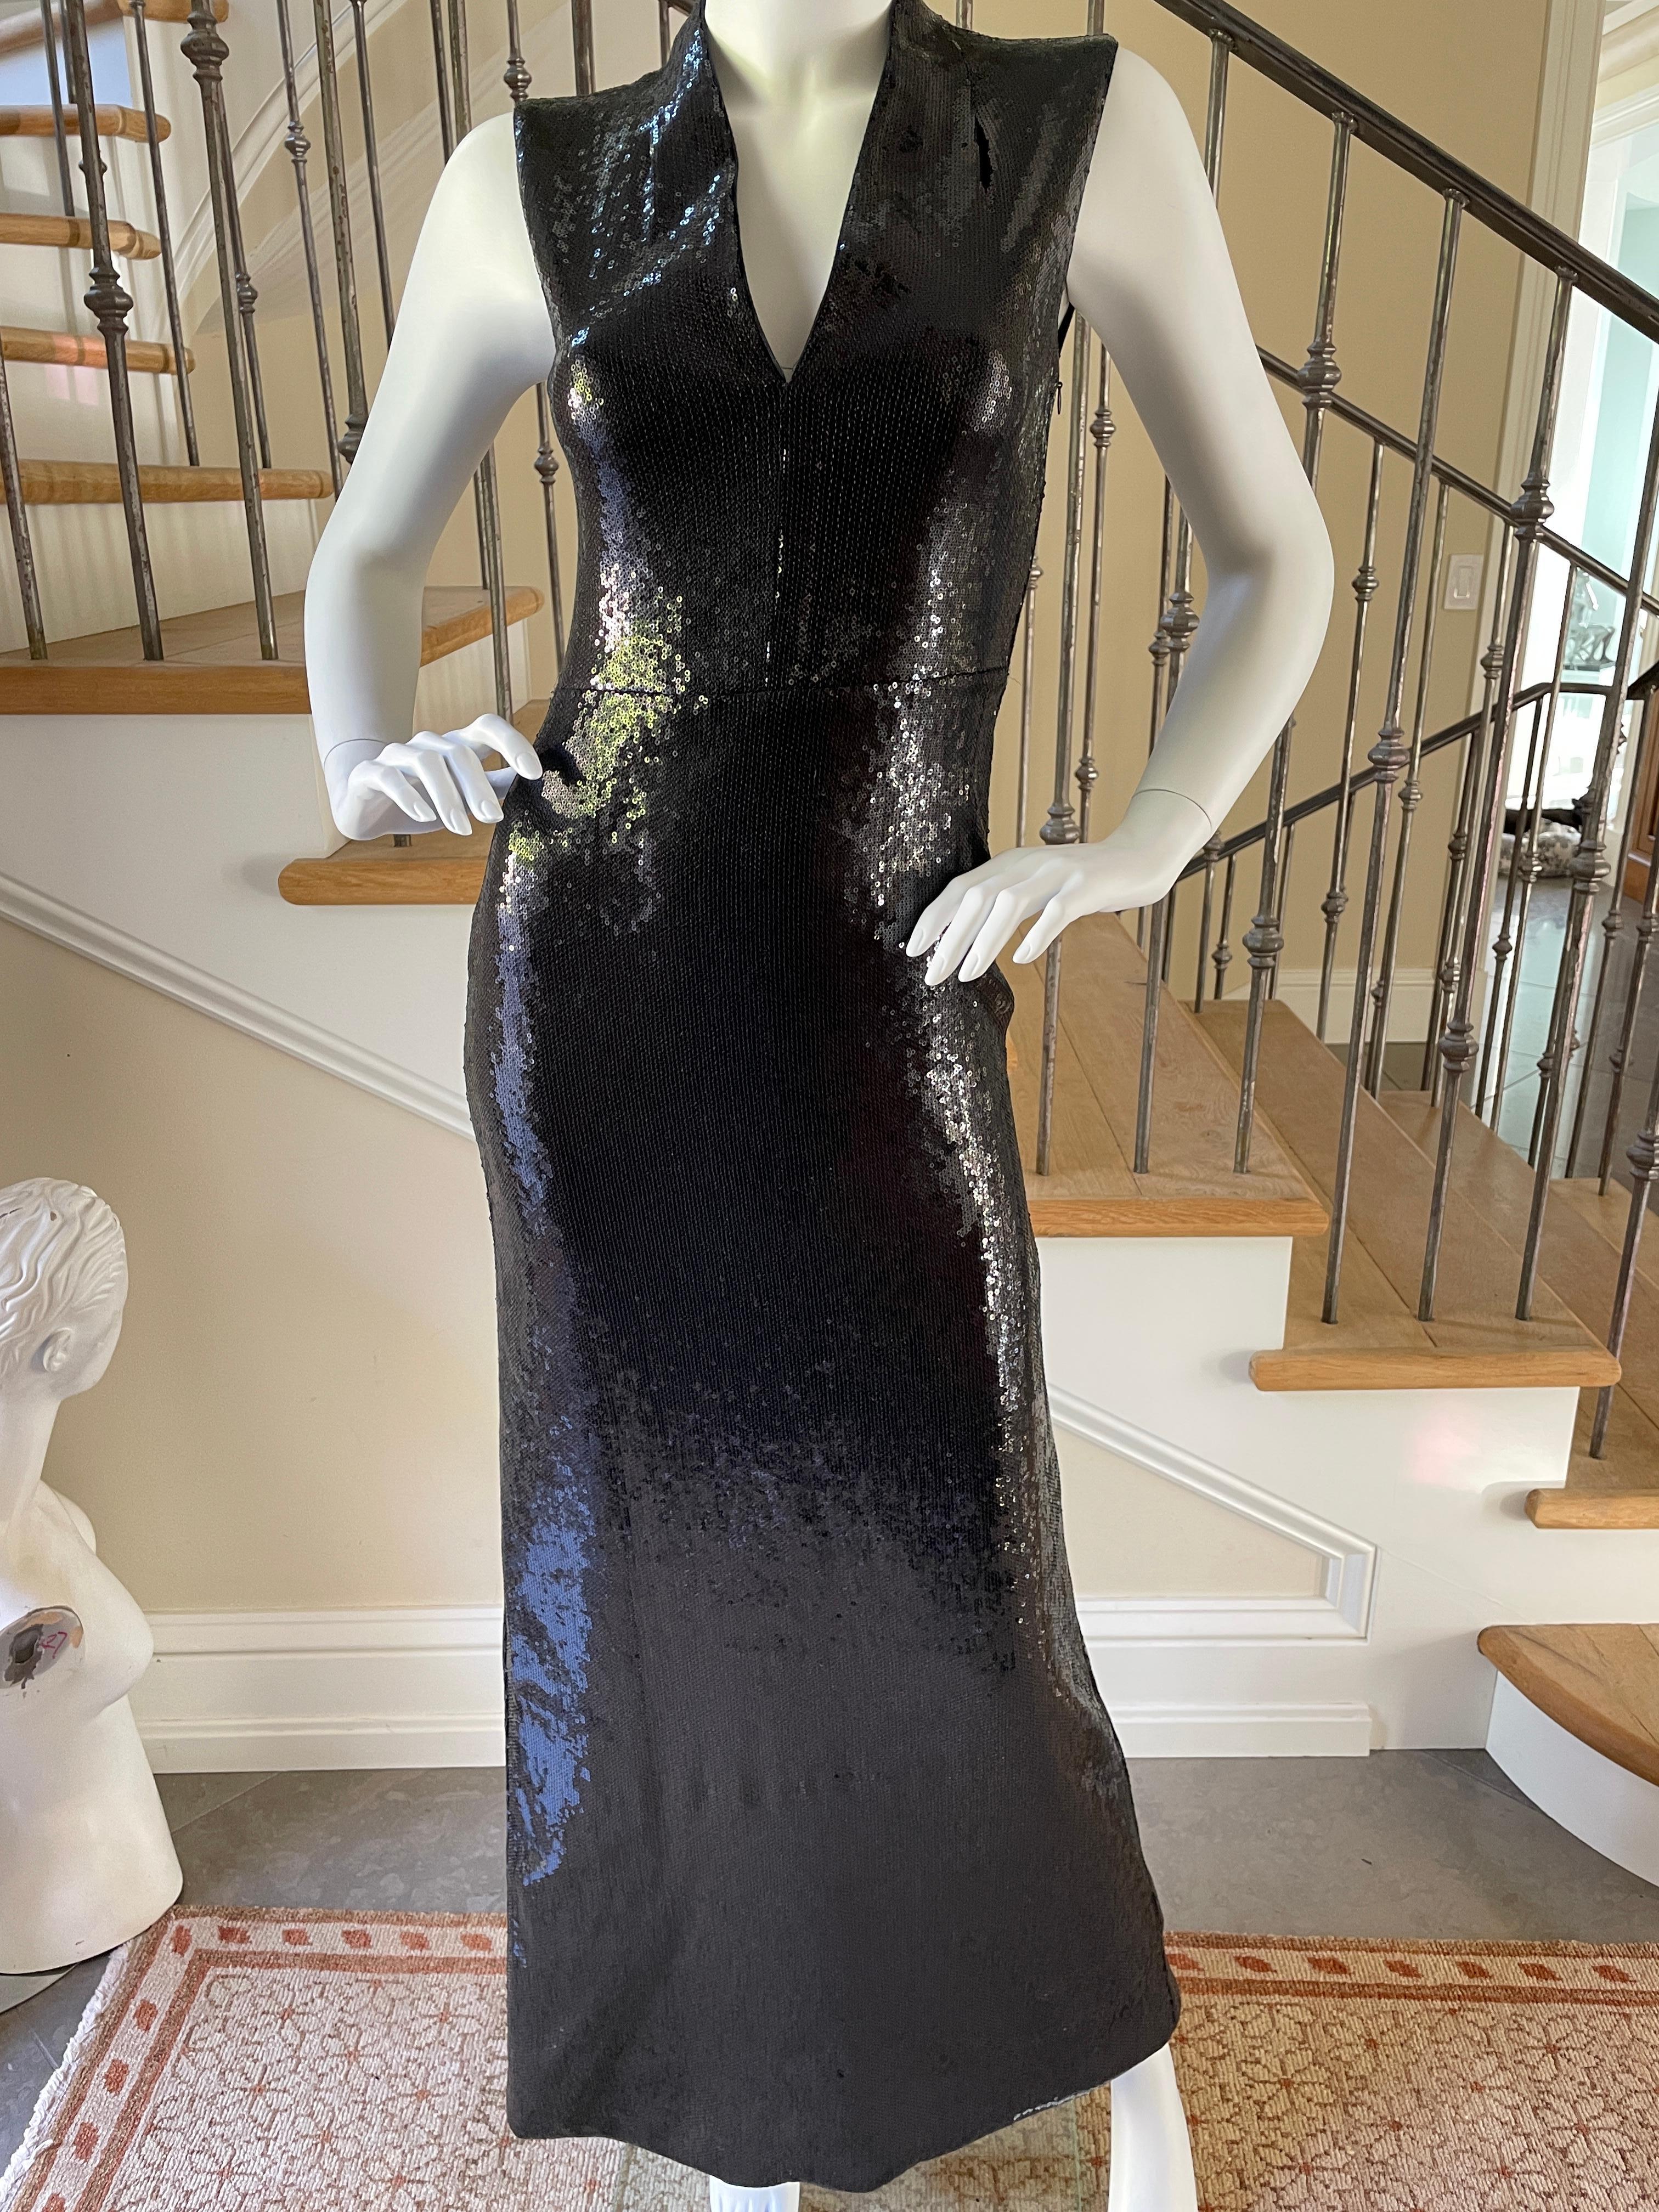 Just Cavalli Black Sequin Scuba Look Sheath Dress by Roberto Cavalli In Excellent Condition For Sale In Cloverdale, CA